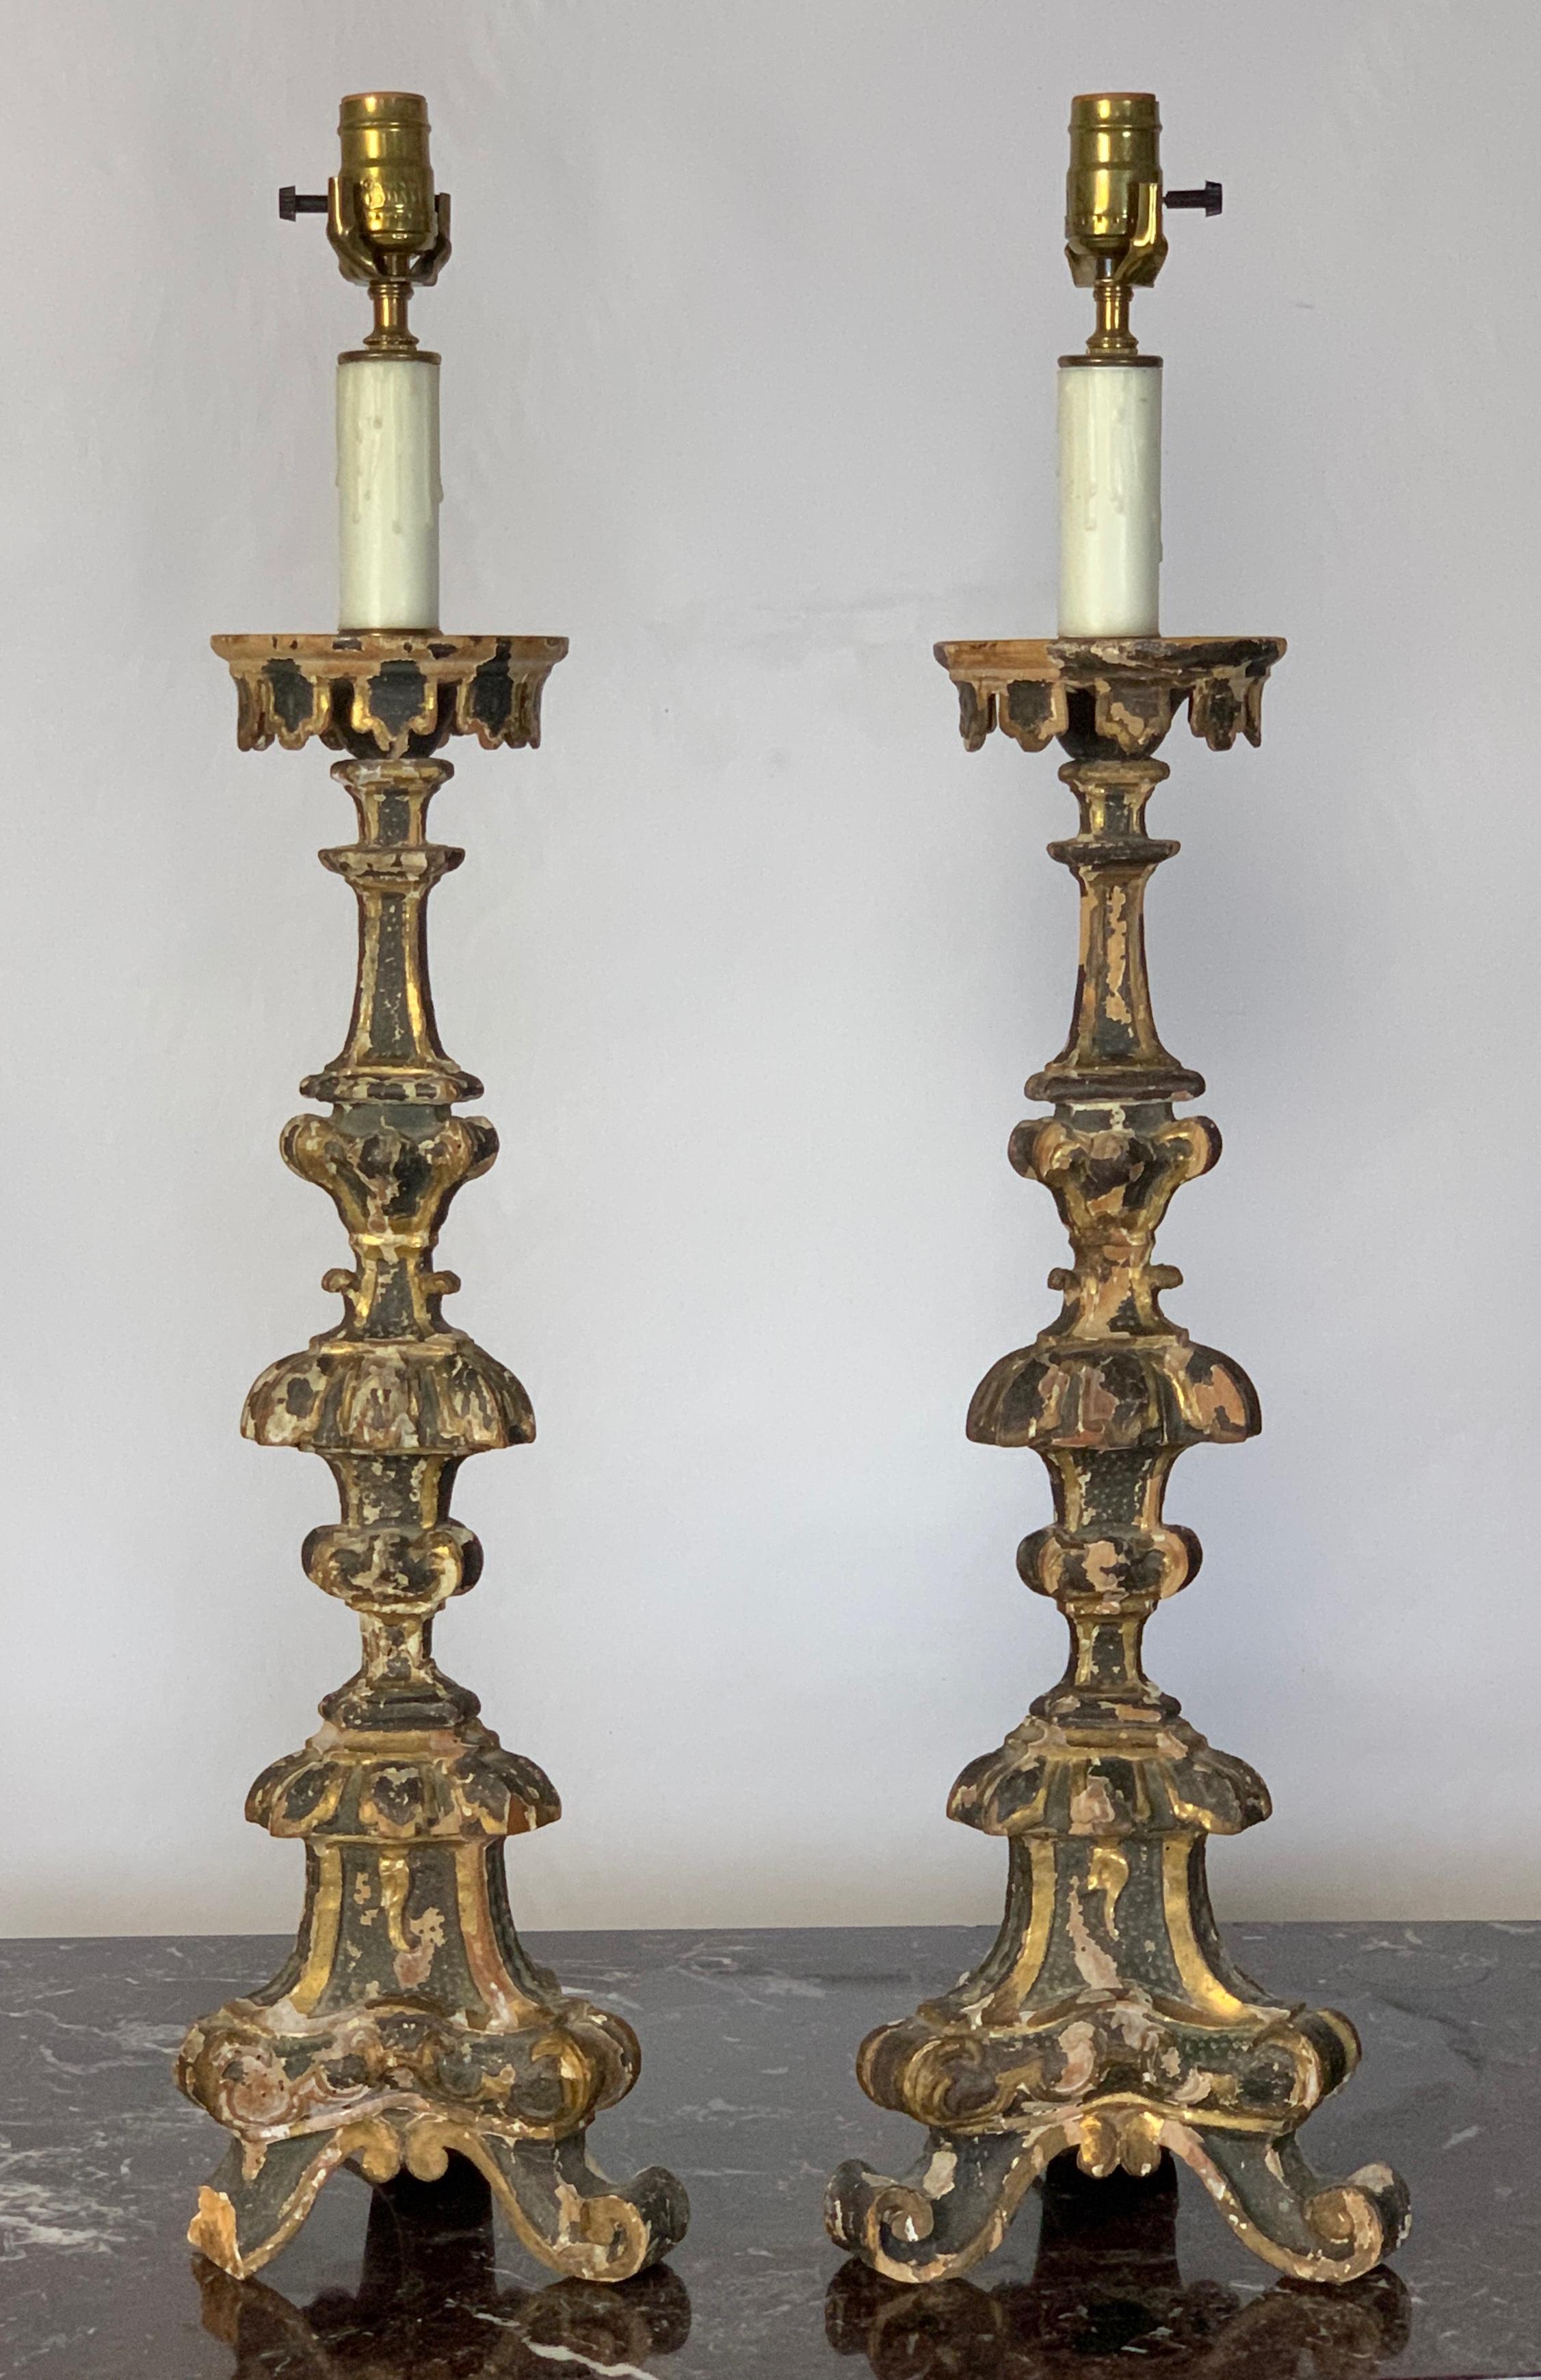 Carved Pair of 18th Century Italian Pricket Candlestick Lamps